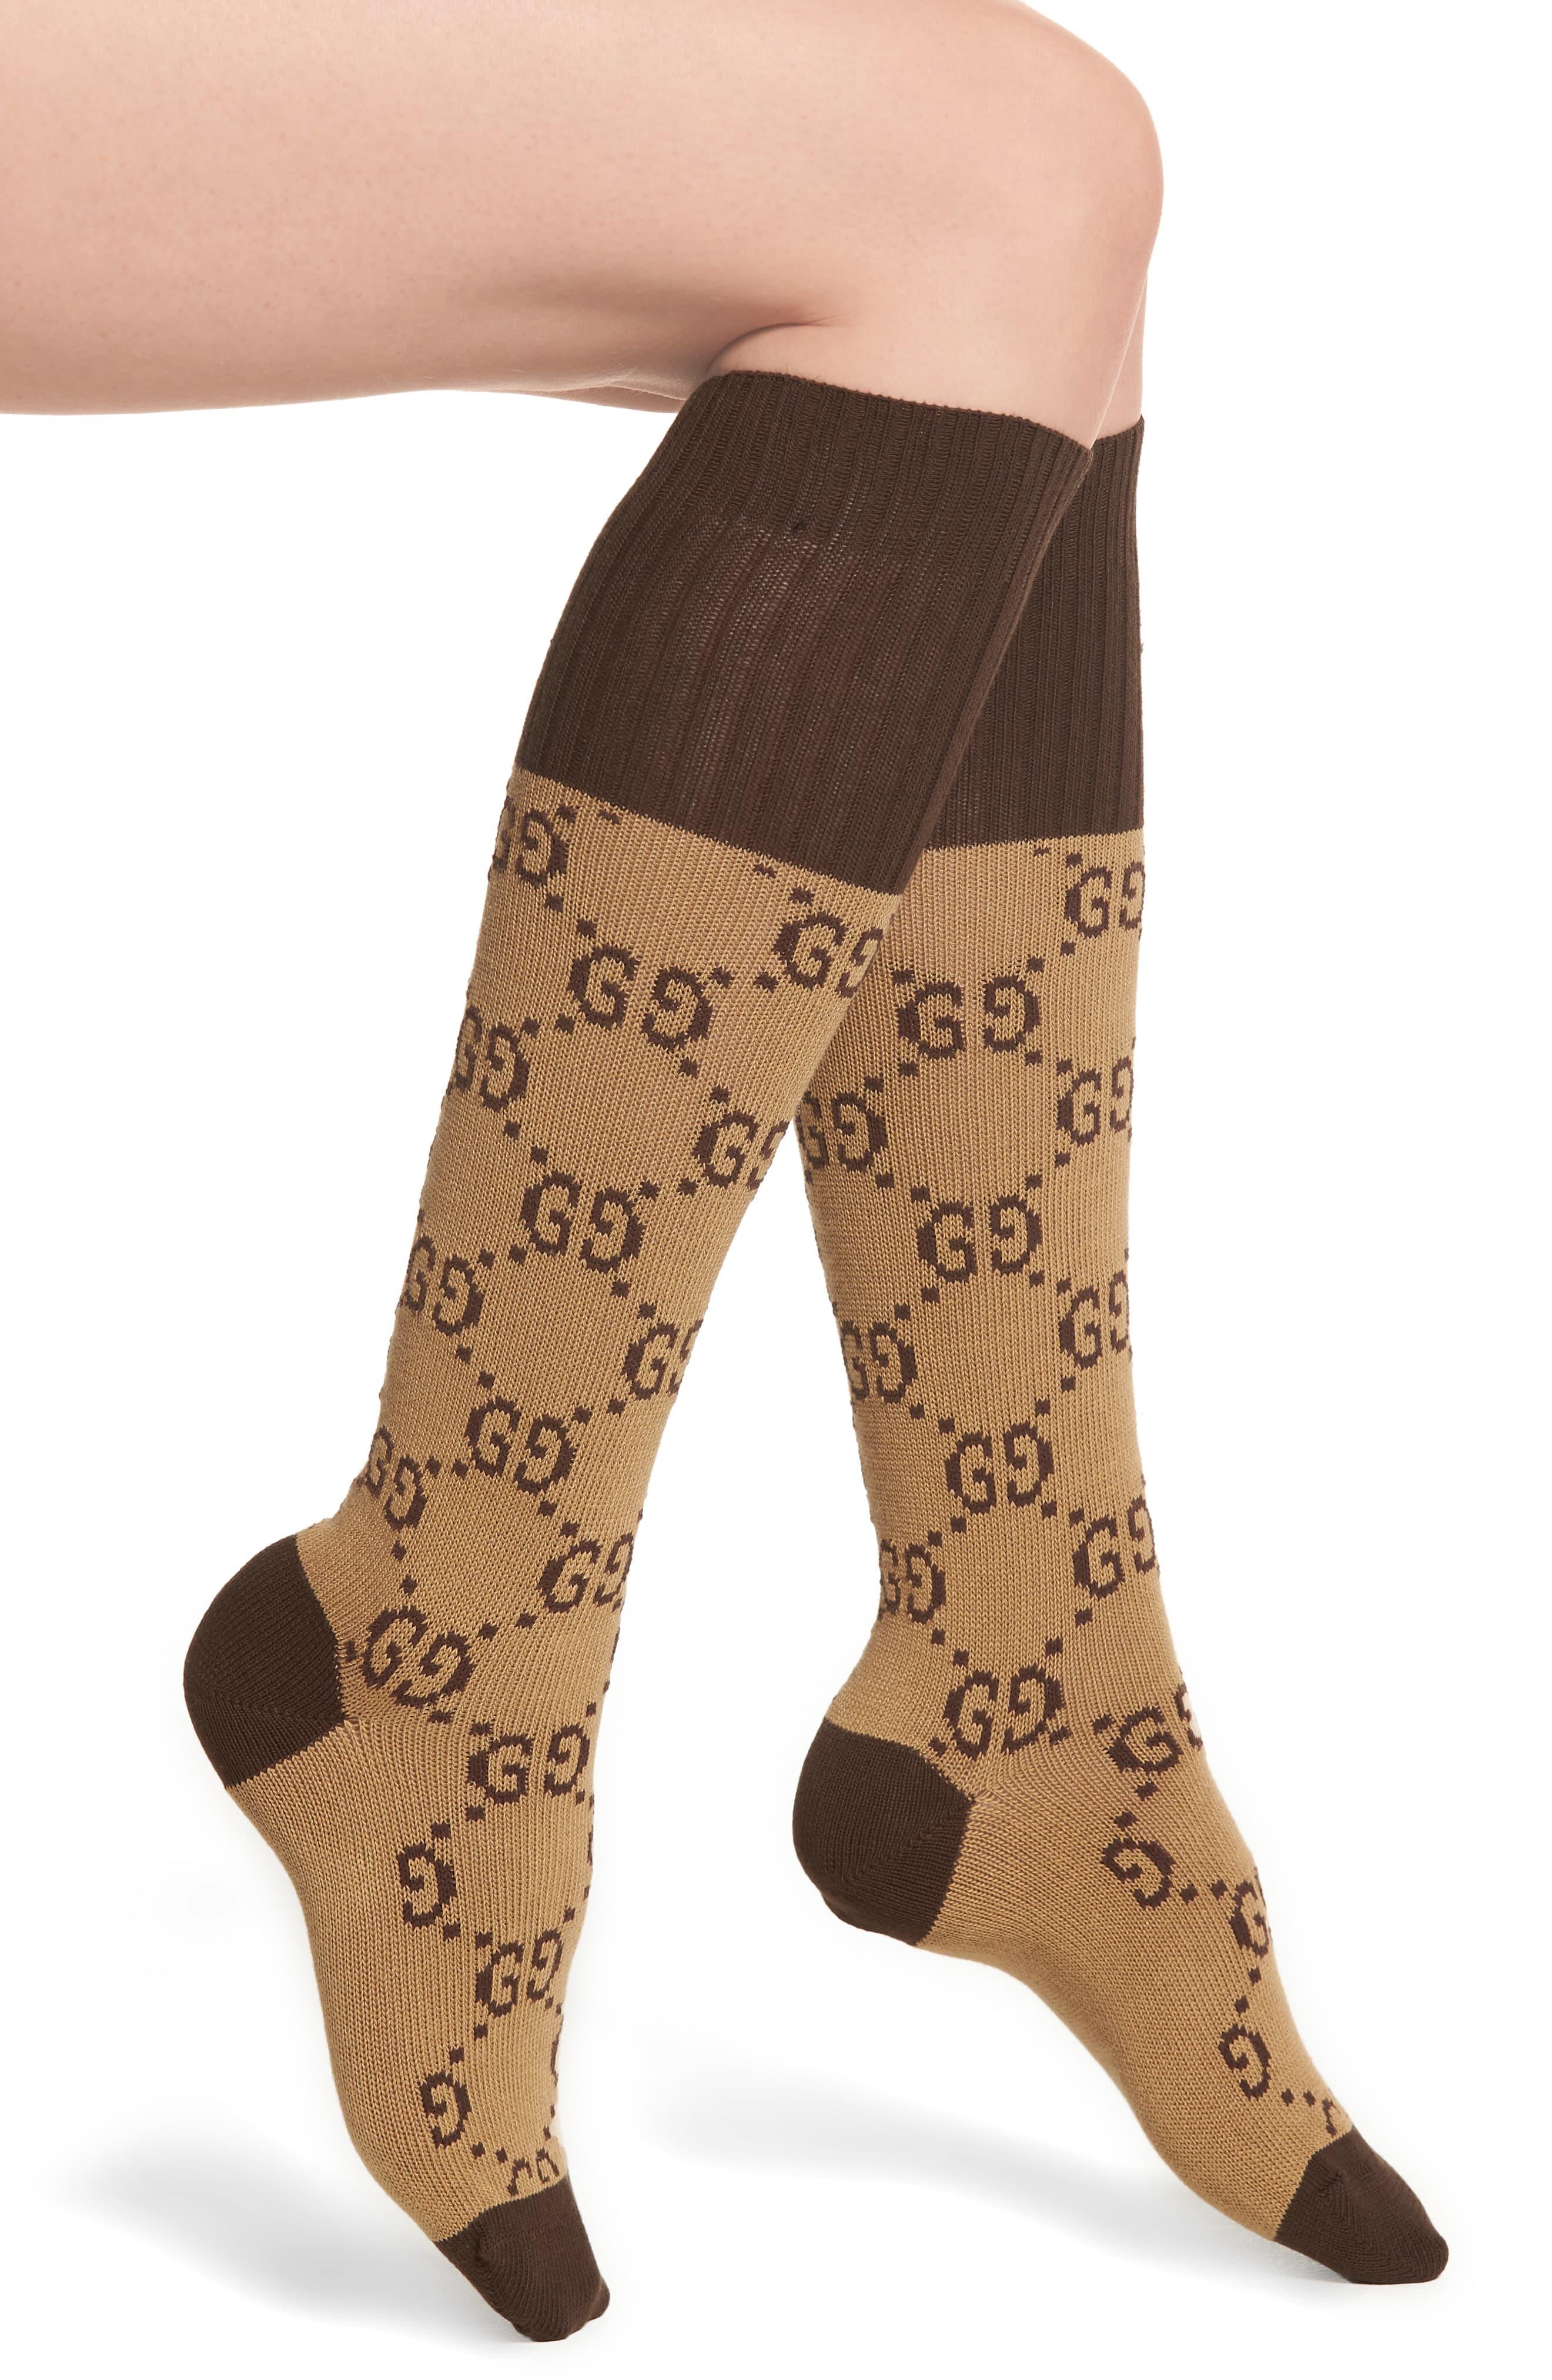 Gucci Cotton Gg Knee Socks in gg Pattern (Brown) - Save 54% - Lyst